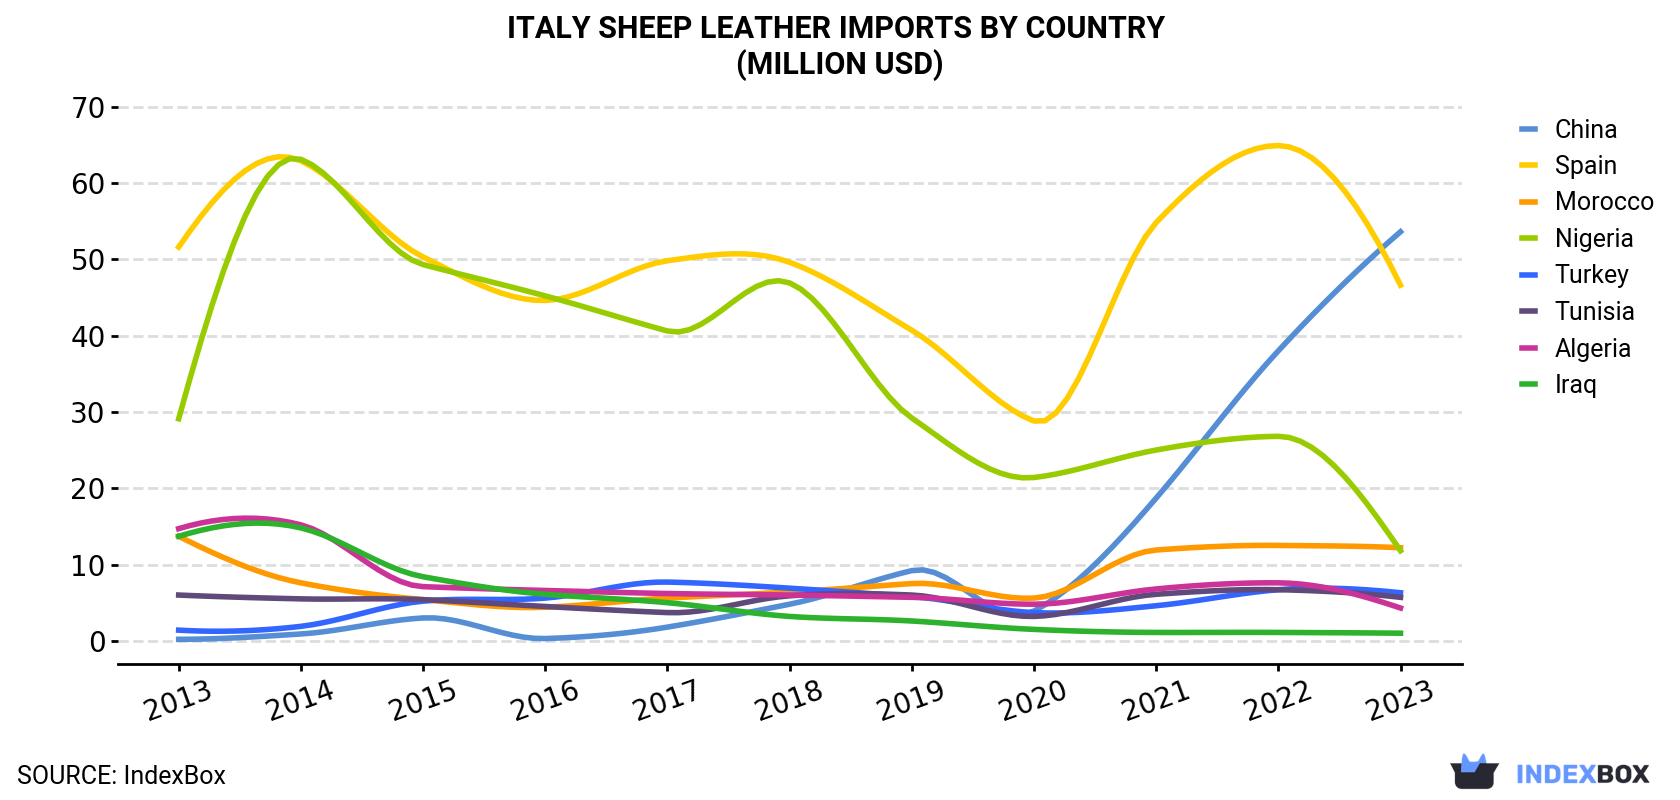 Italy Sheep Leather Imports By Country (Million USD)